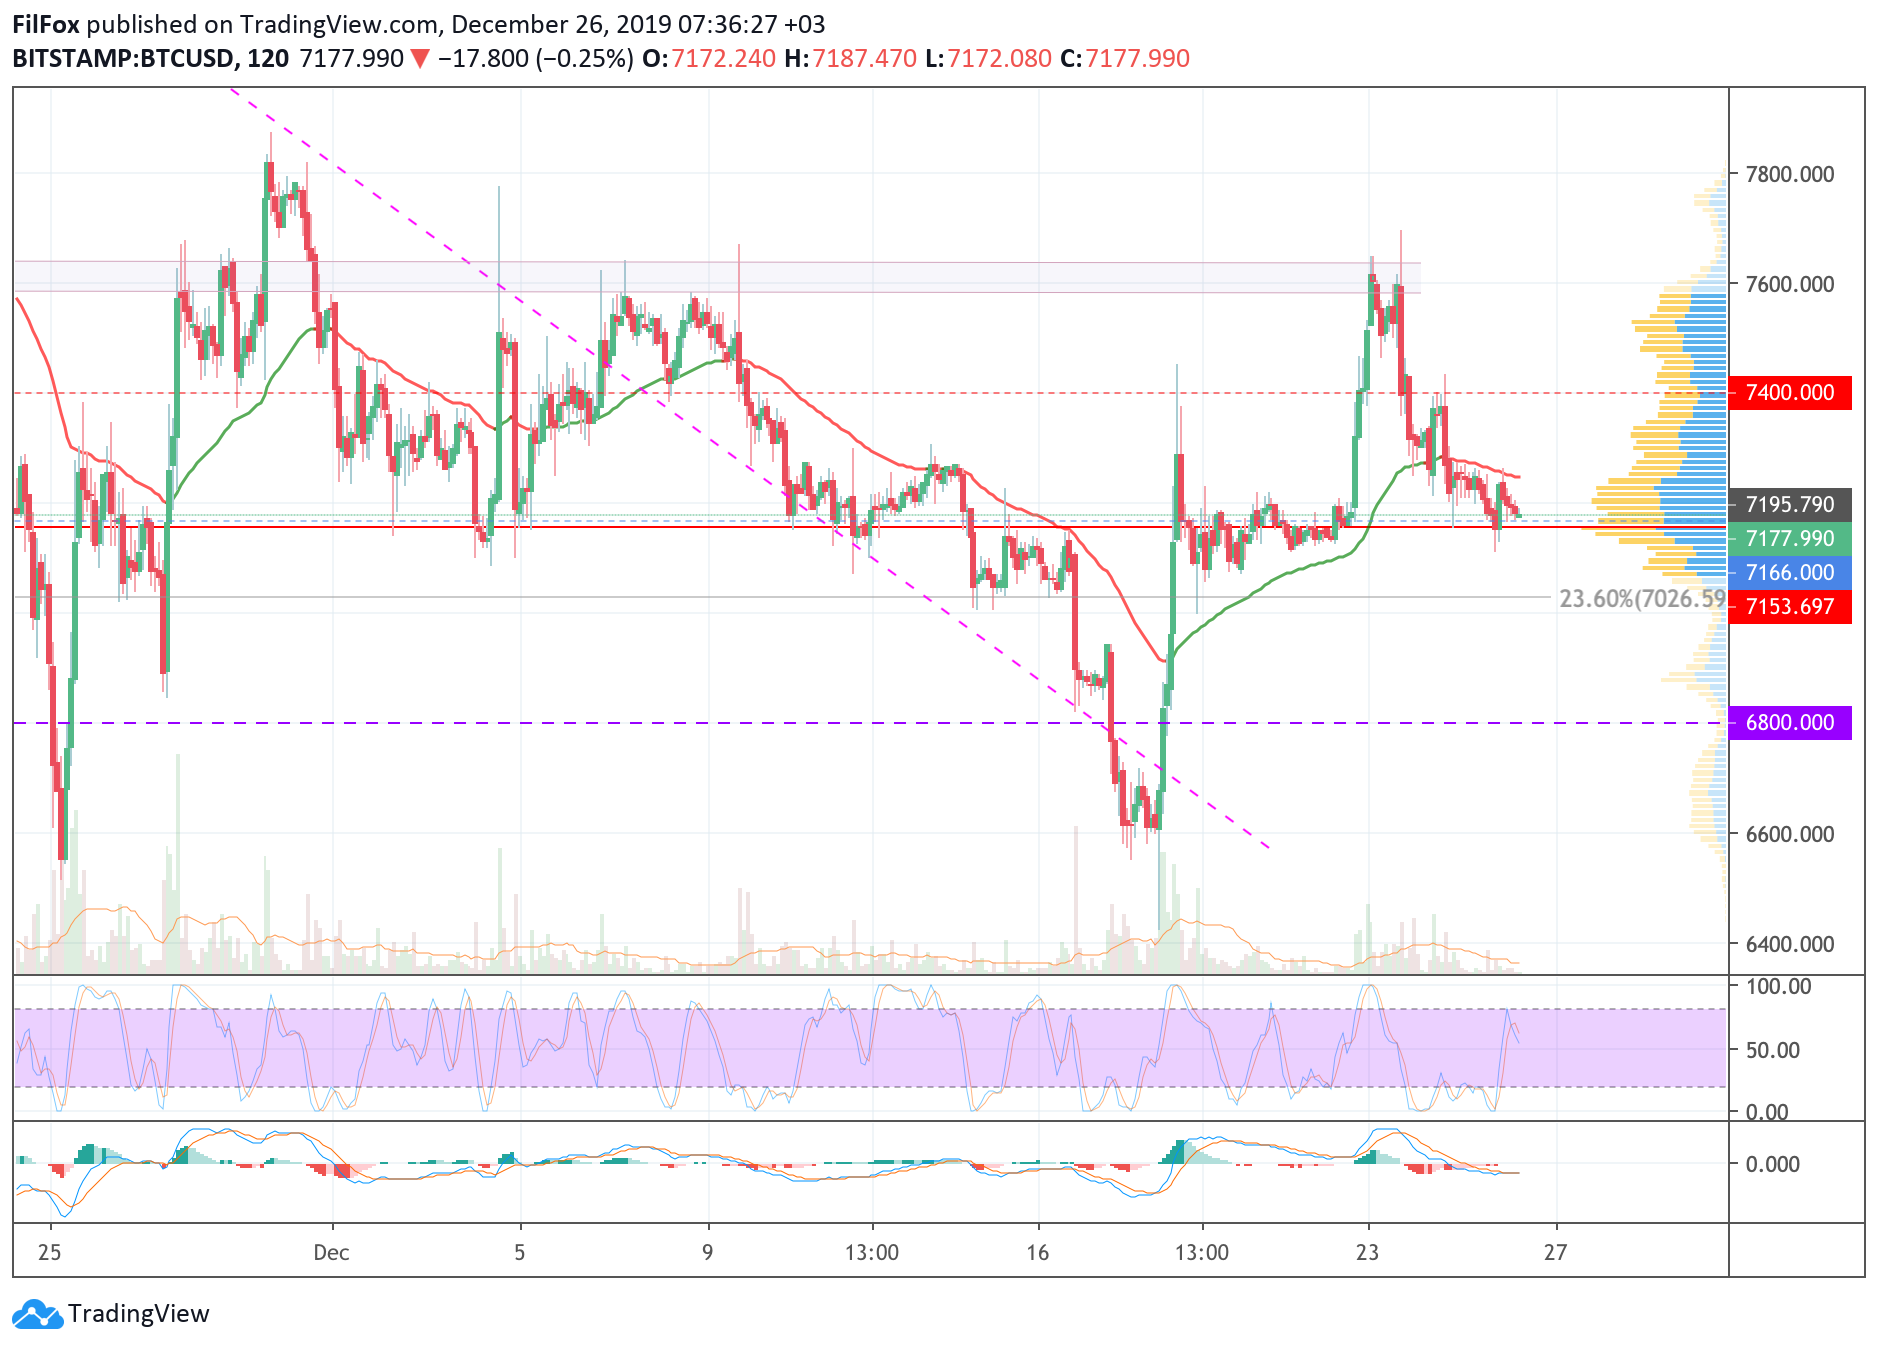 Analysis of cryptocurrency pairs BTC / USD, ETH / USD and XRP / USD on 12/26/2019